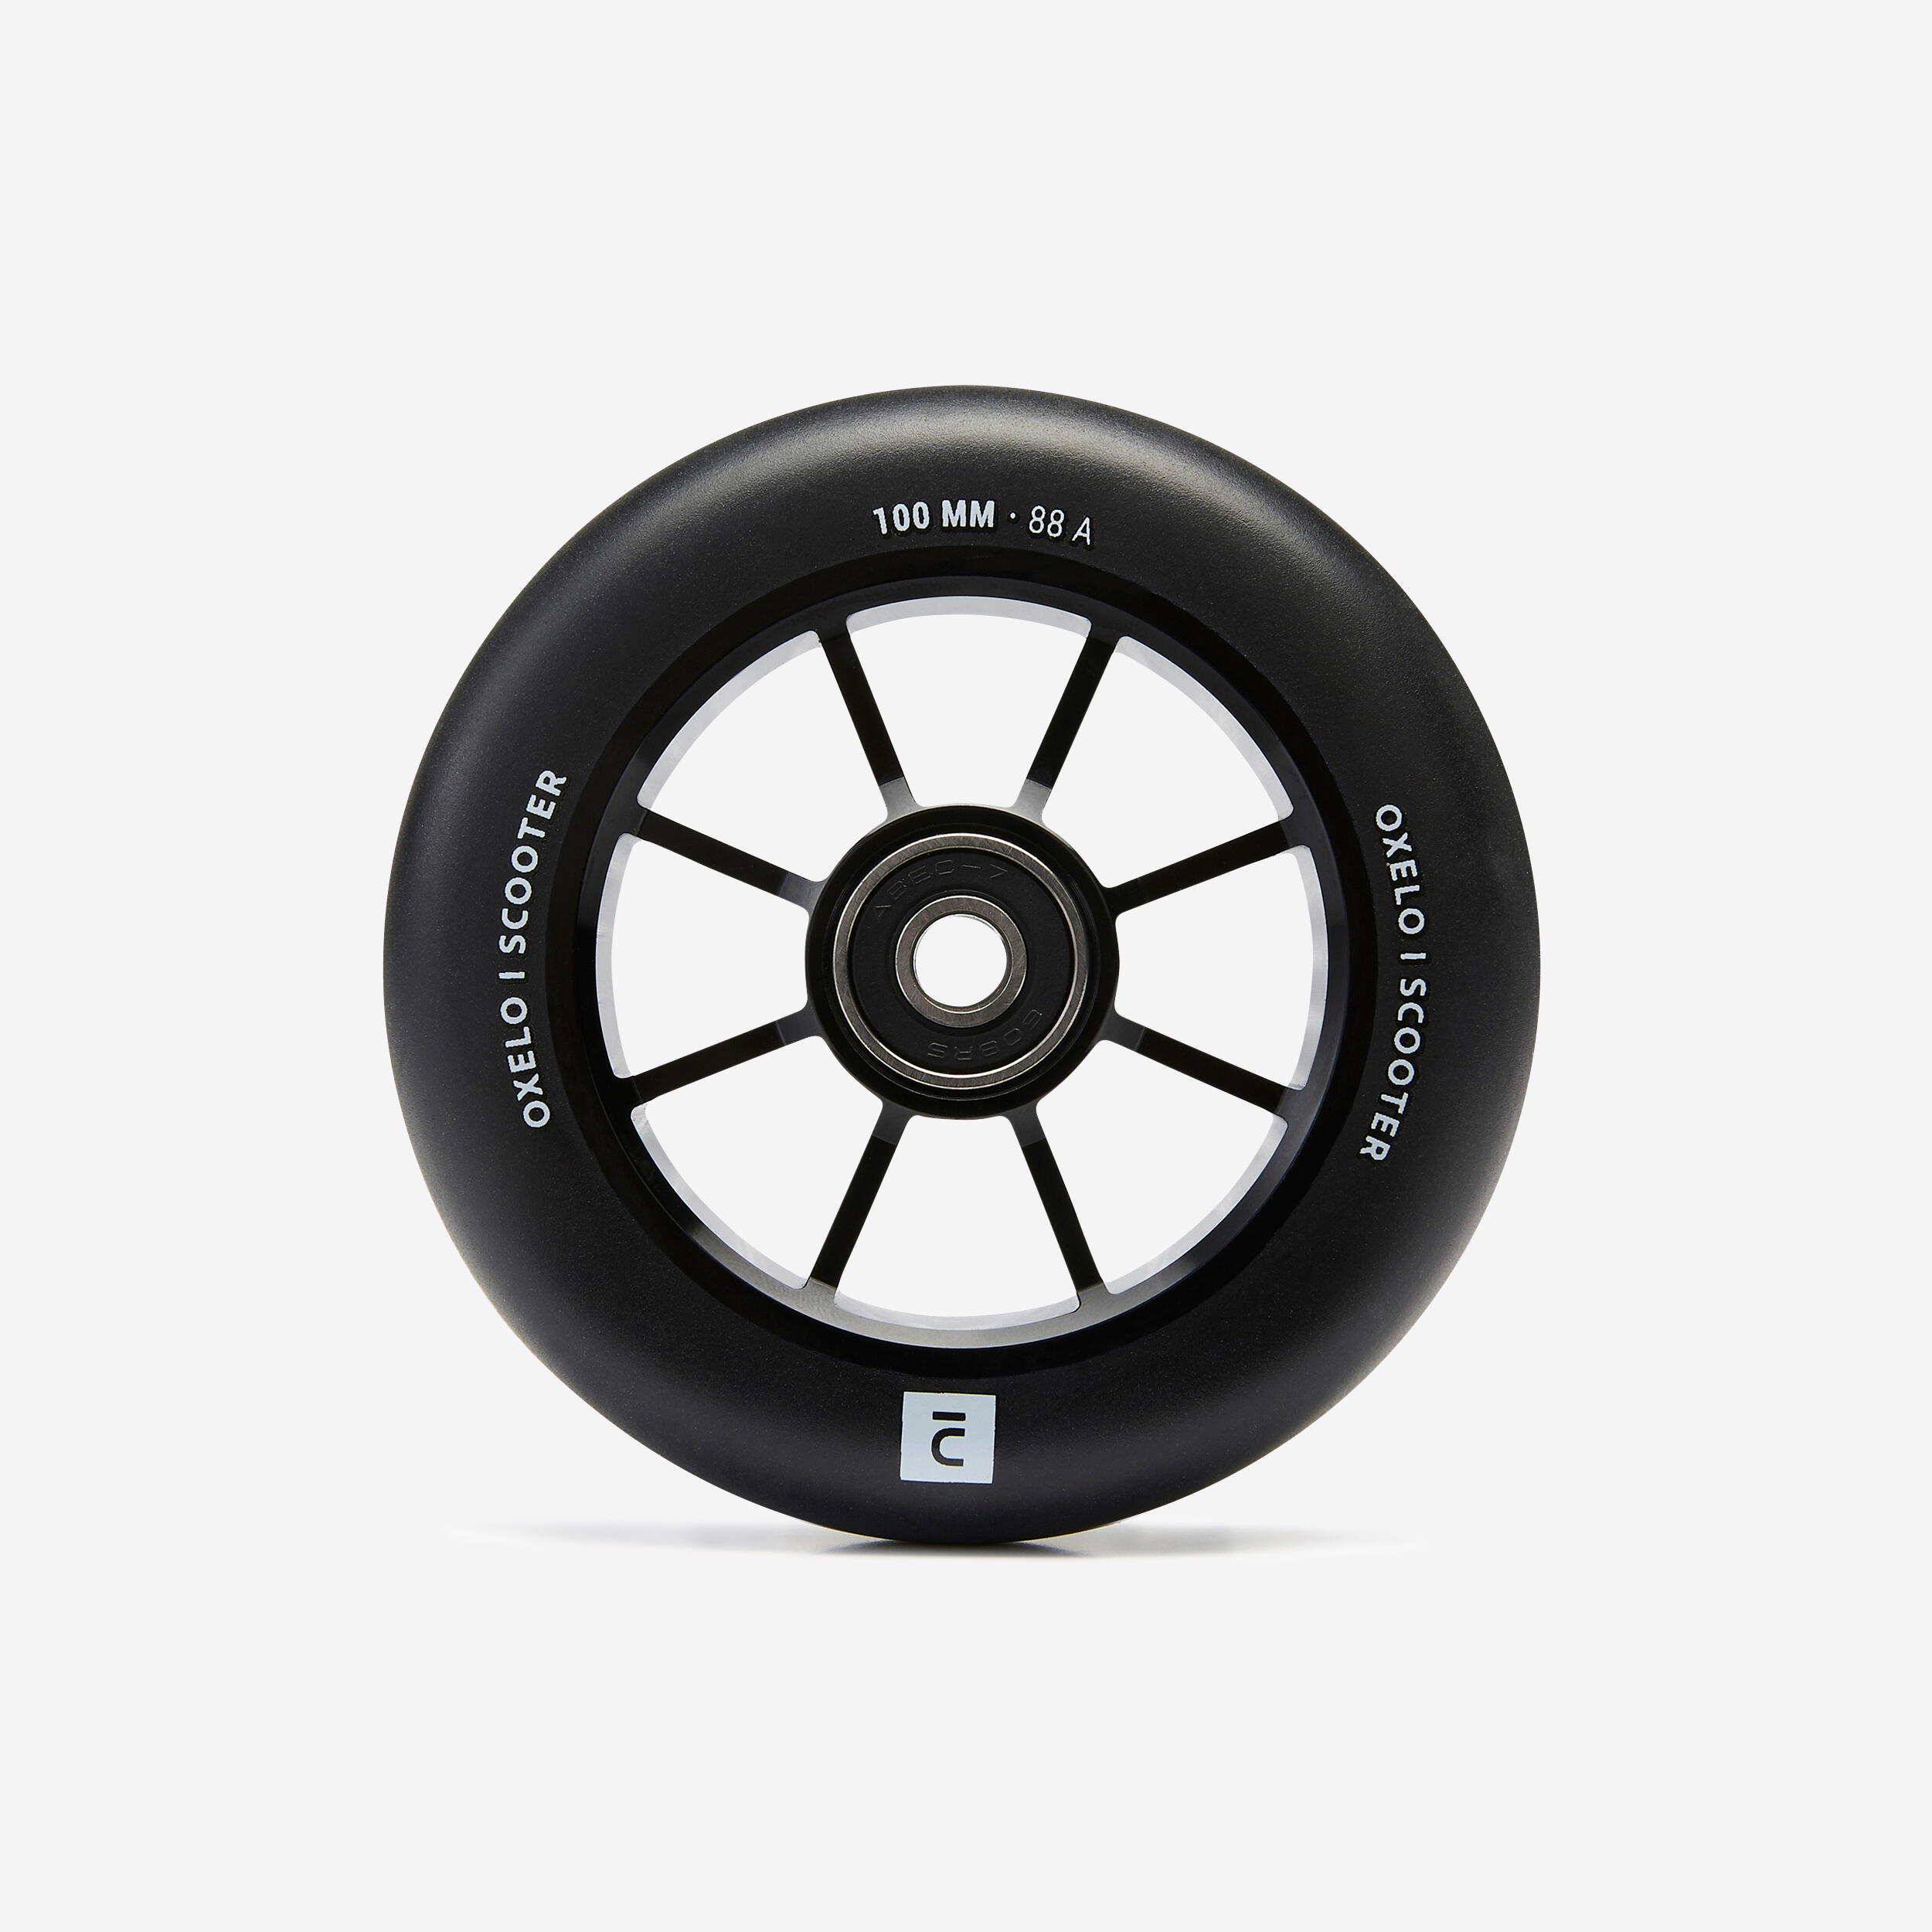 Freestyle Scotter Wheel 100 mm - PU85A - OXELO